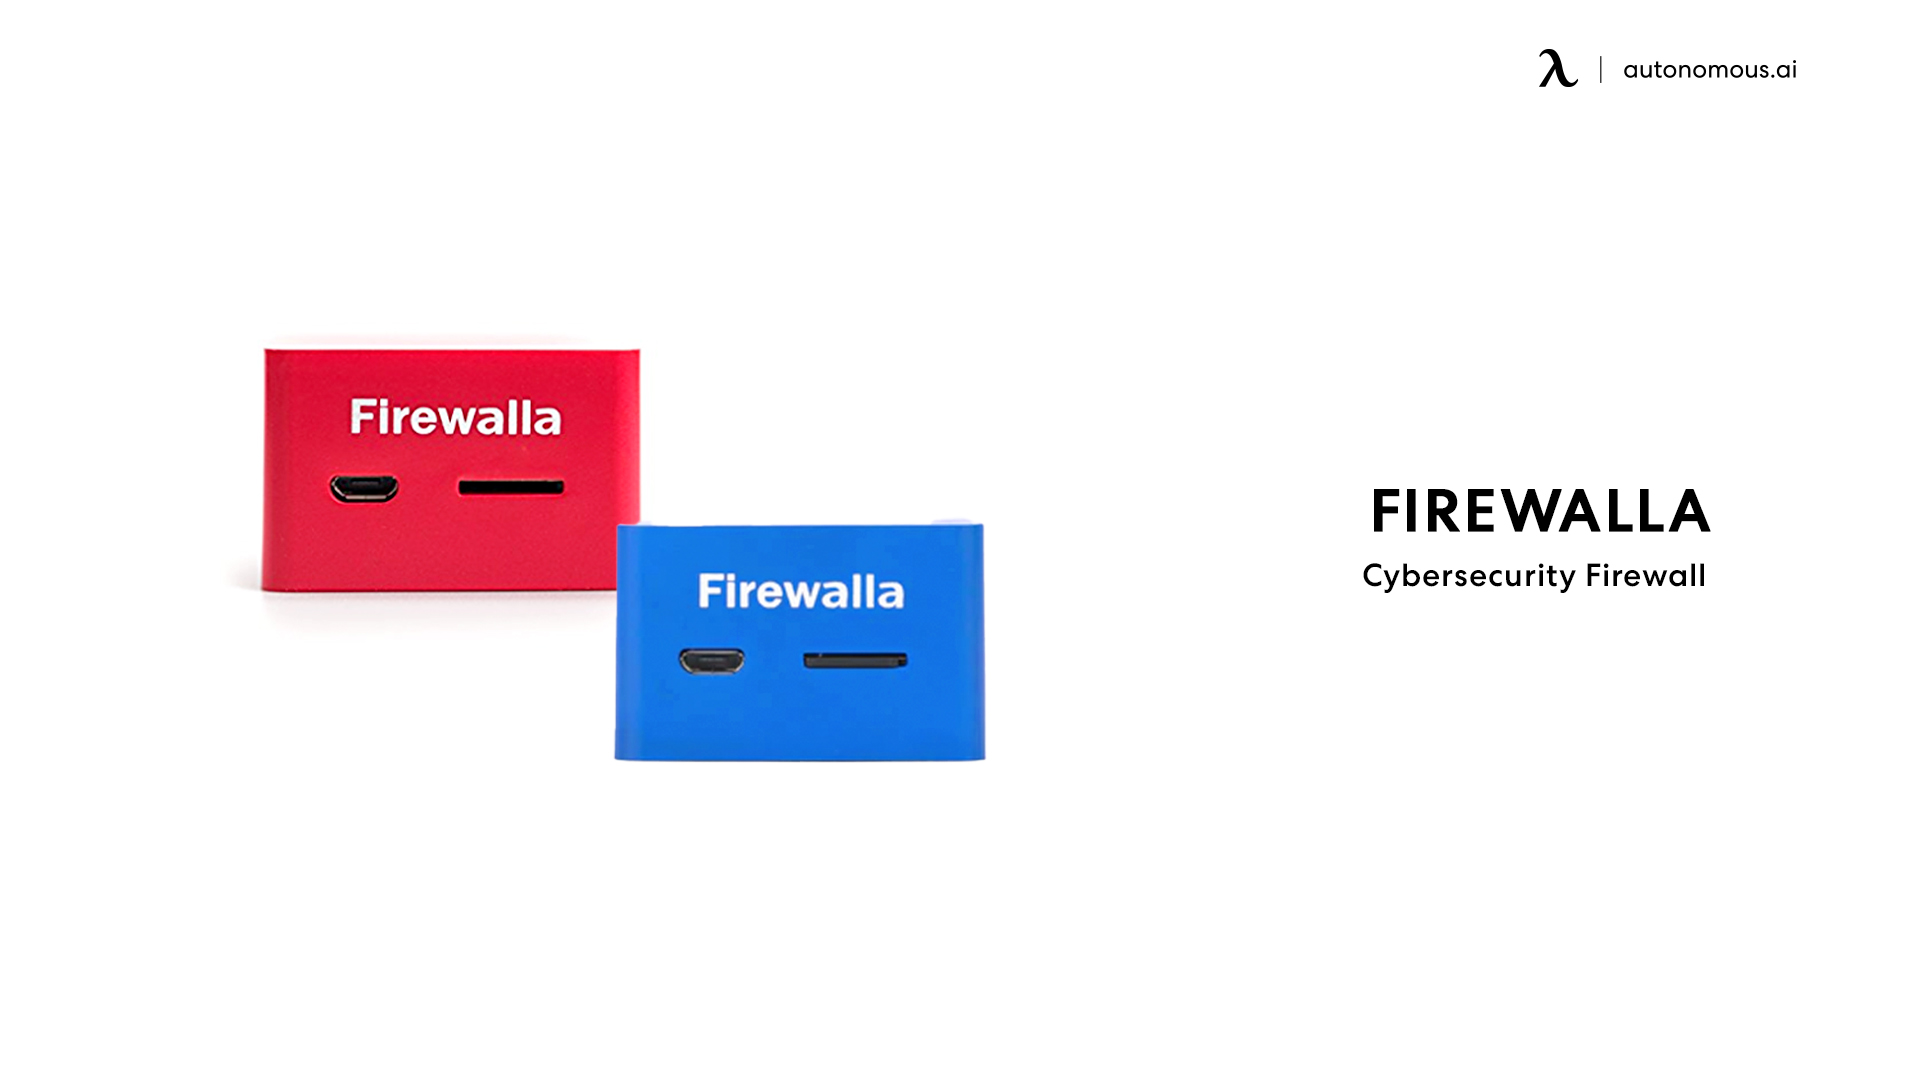 Firewalla home network security devices